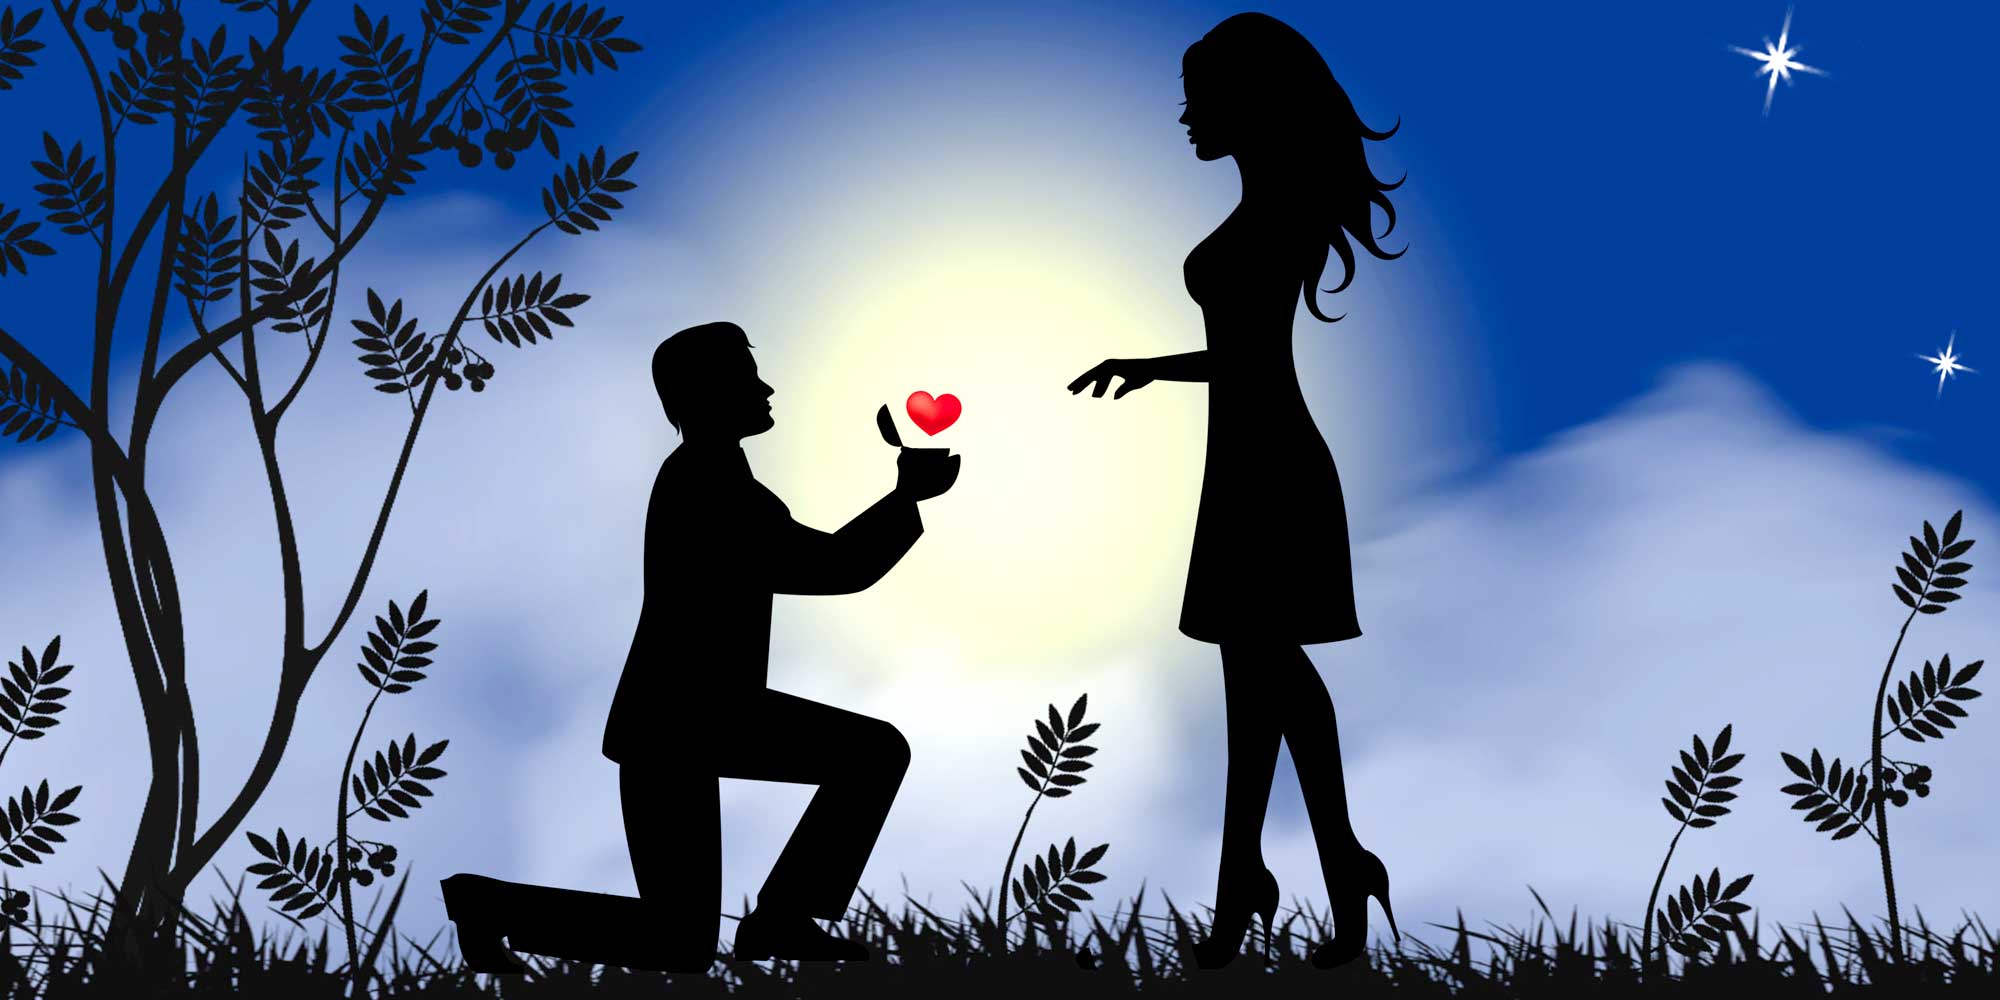 4 Cringeworthy But Really Cute Geeky Wedding Proposals